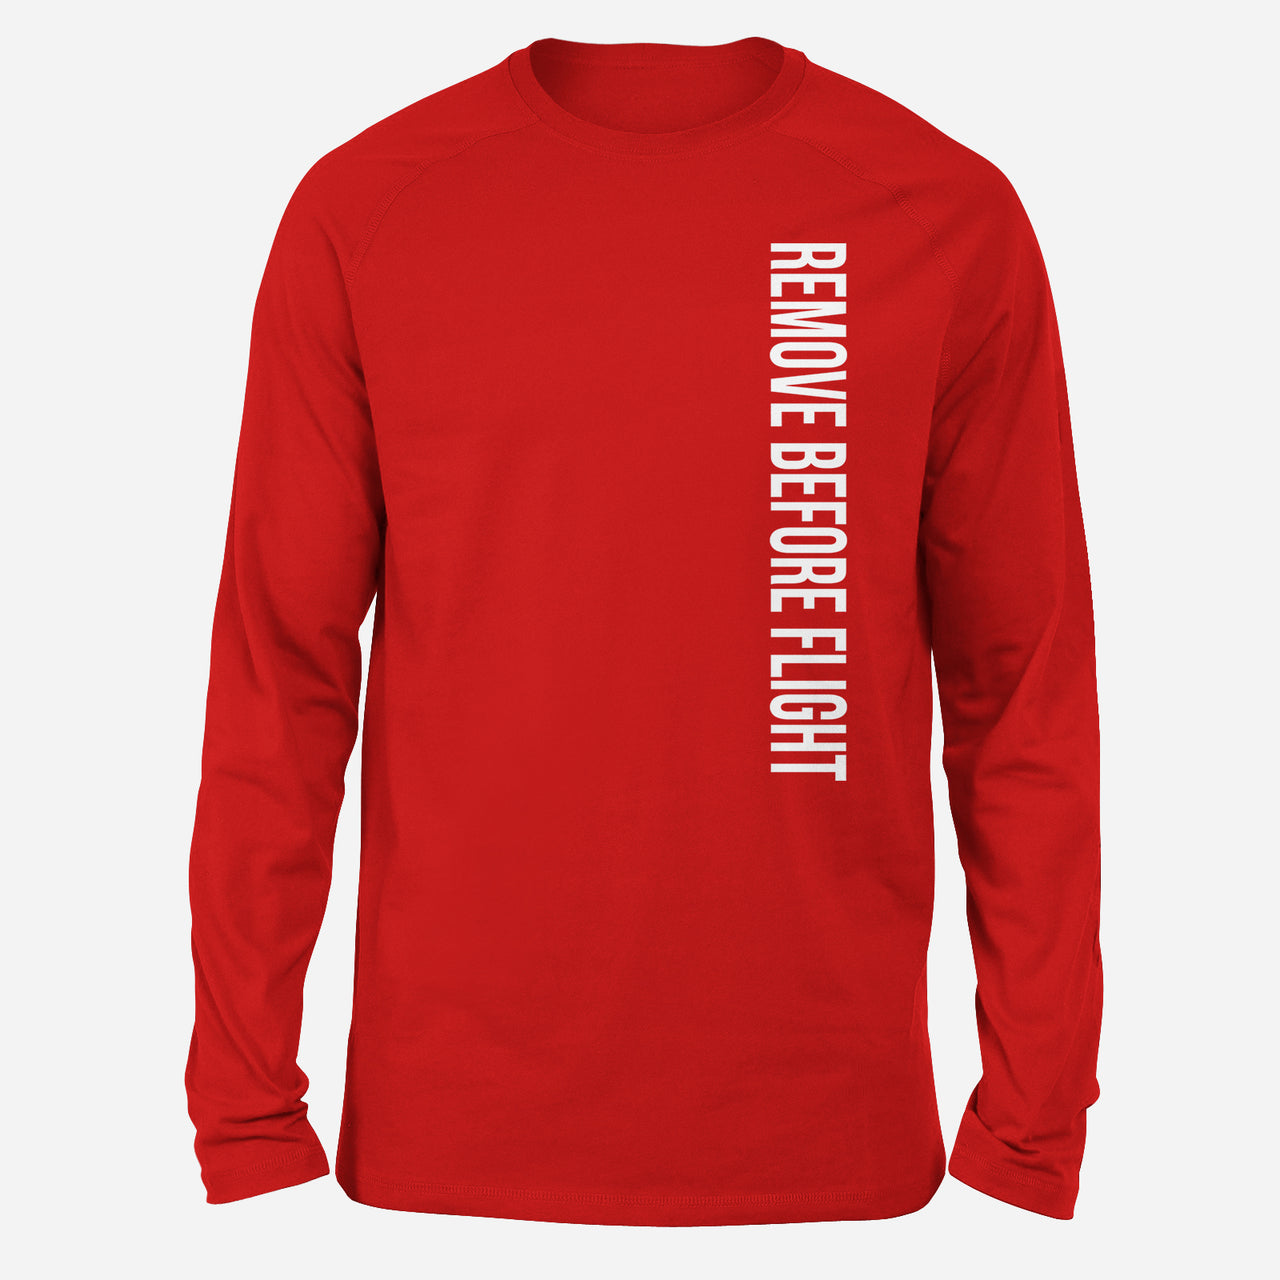 Remove Before Flight 2 Designed Long-Sleeve T-Shirts